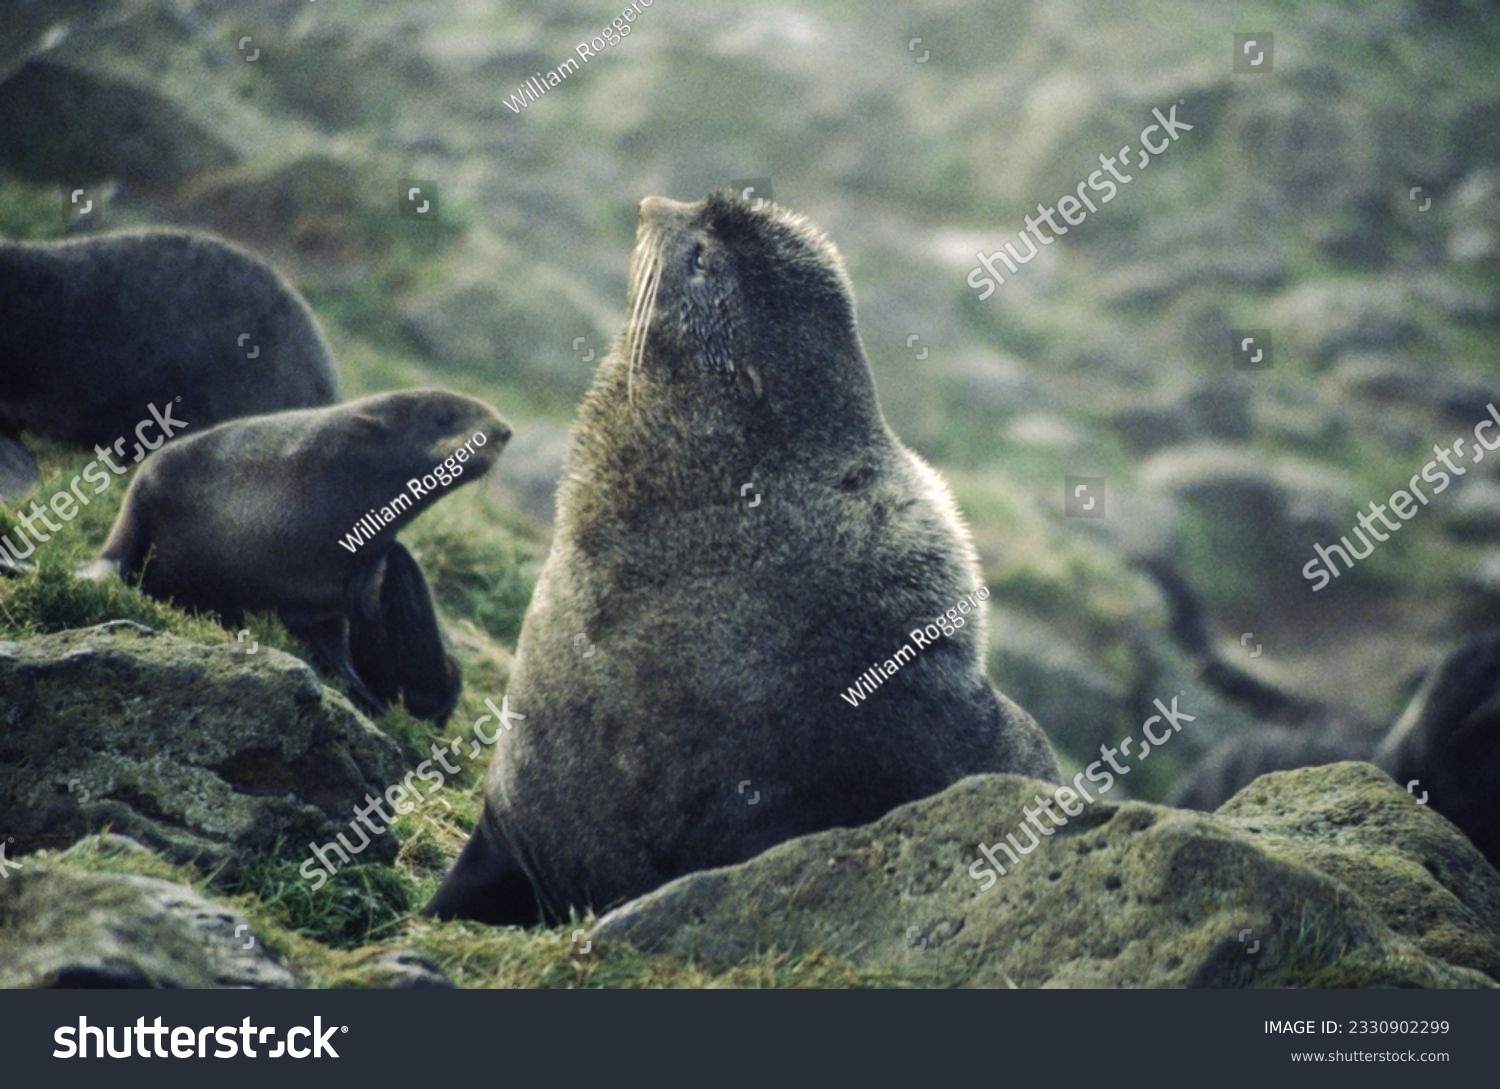 Northern fur seals have a stocky body, small head, very short snout, and extremely dense fur that ends at the wrist lines of their flippers. Their hind flippers can be up to one-fourth body length. #2330902299